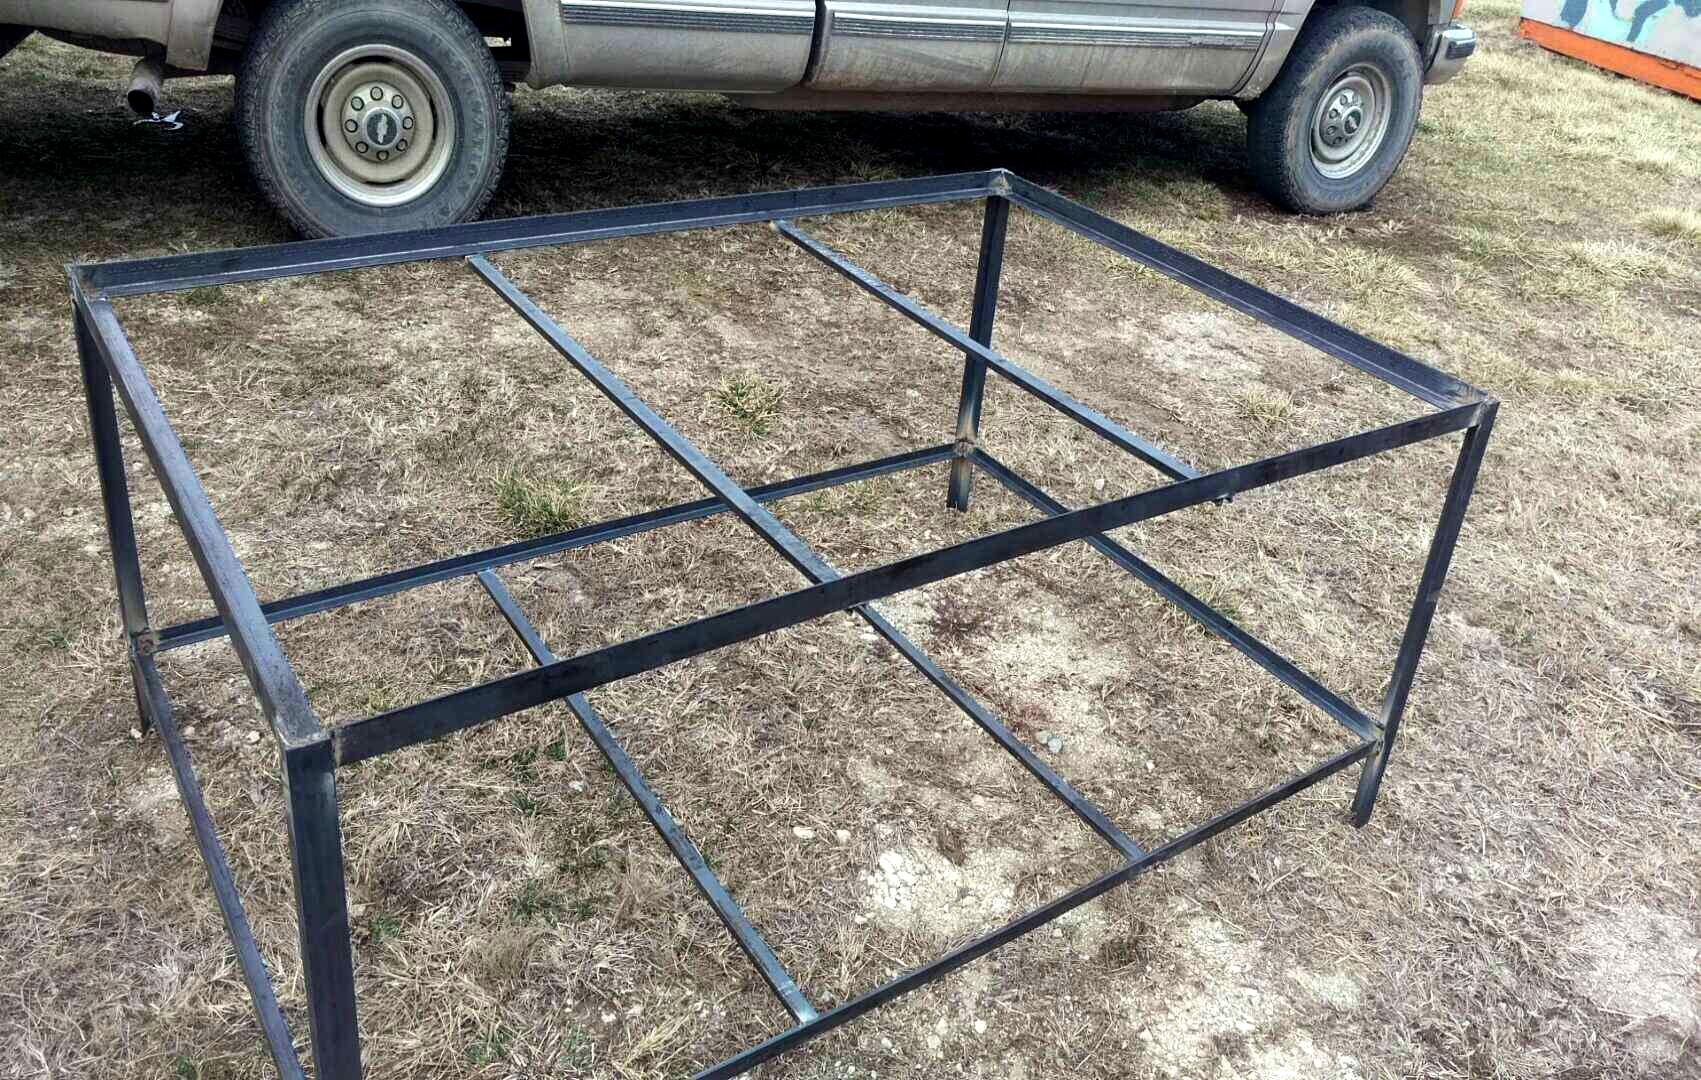 Construction, Do-it-yourself, Game Table, Steel, Welding